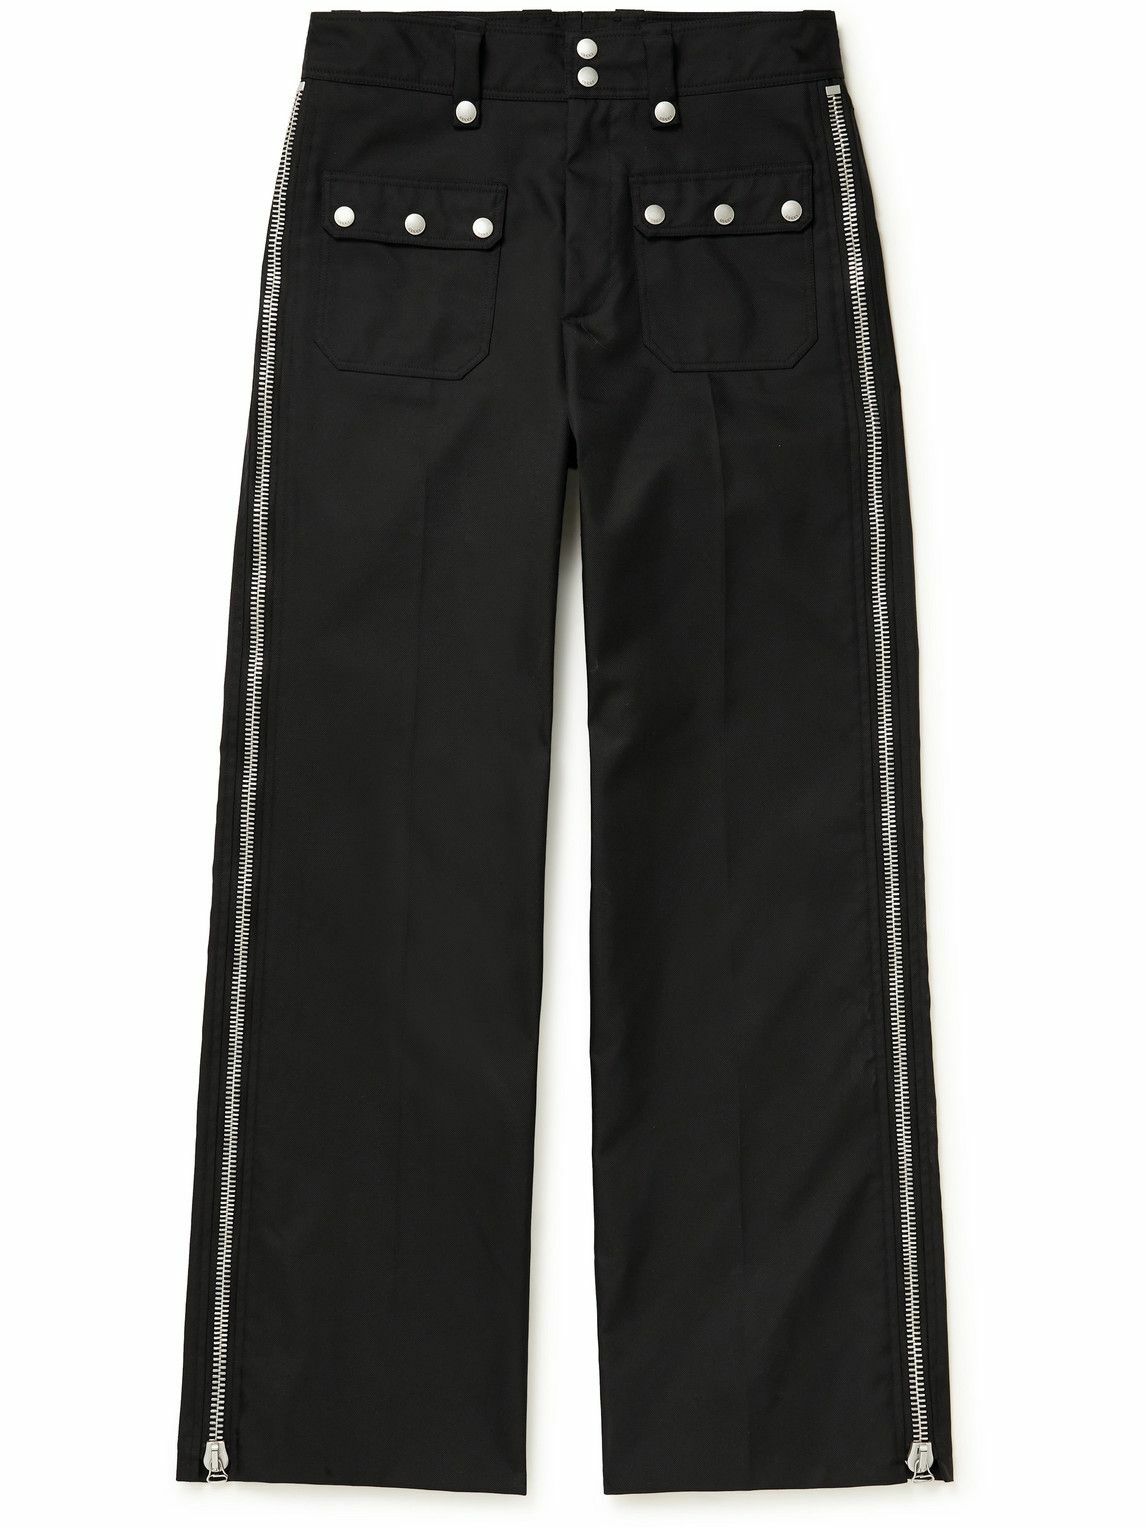 GUCCI - Wide-Leg Zip-Embellished Shell Trousers - Black Gucci